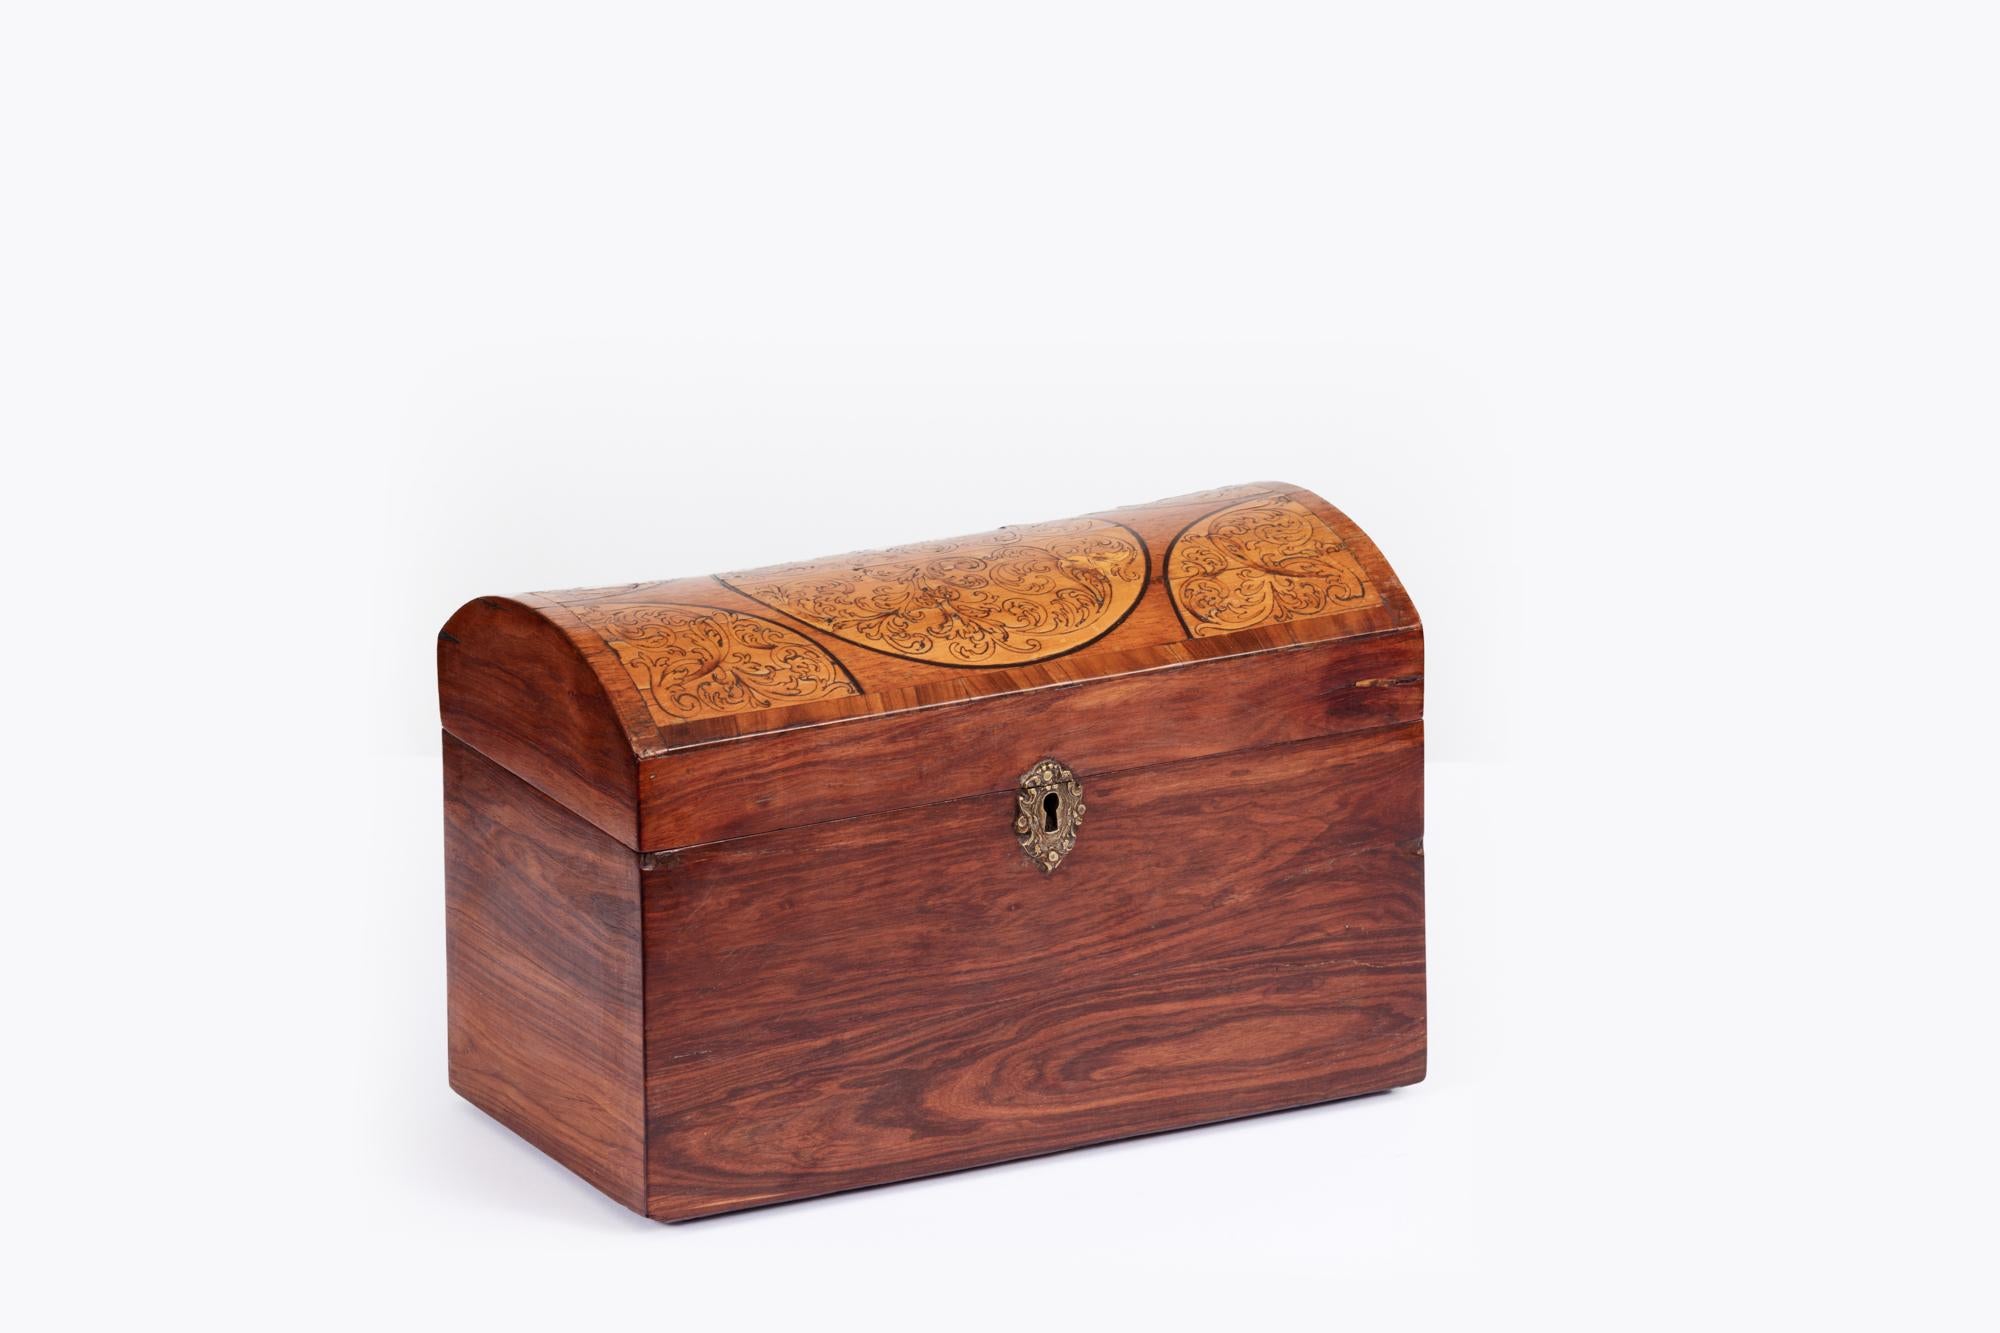 English 19th Century Inlaid Dome-Top Wooden Box For Sale